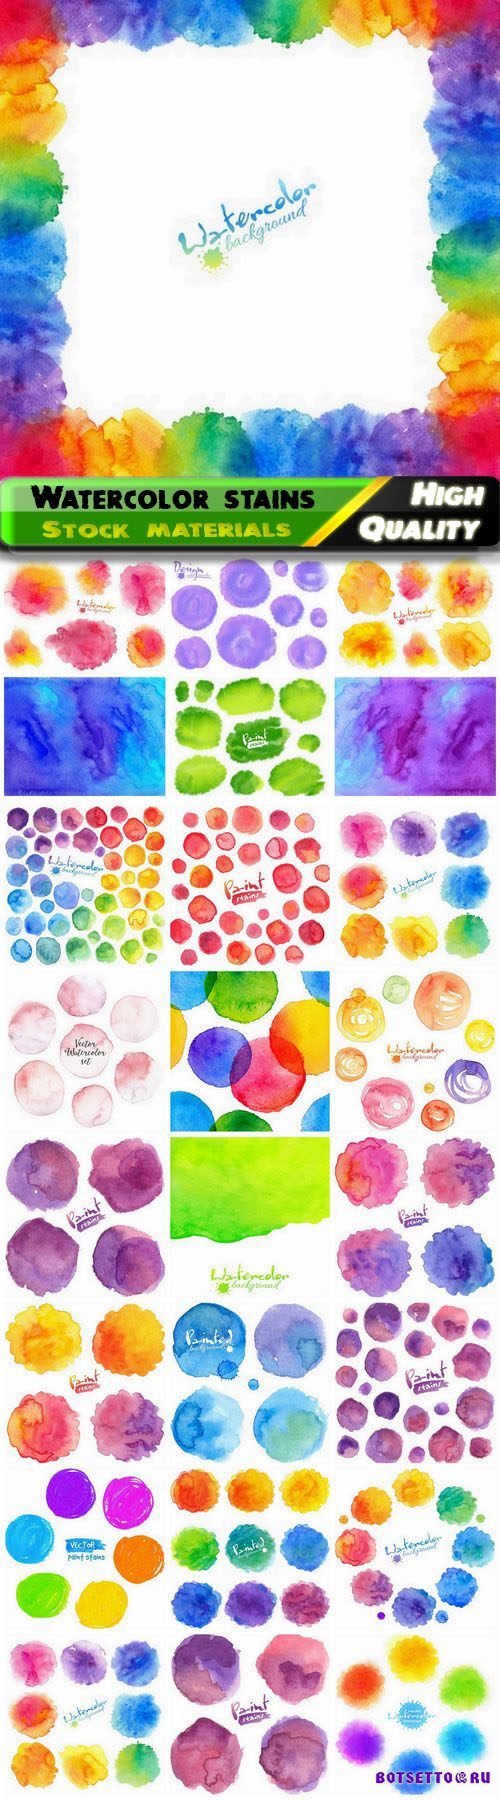 Bright rainbow colors watercolor painted stains 25 Eps